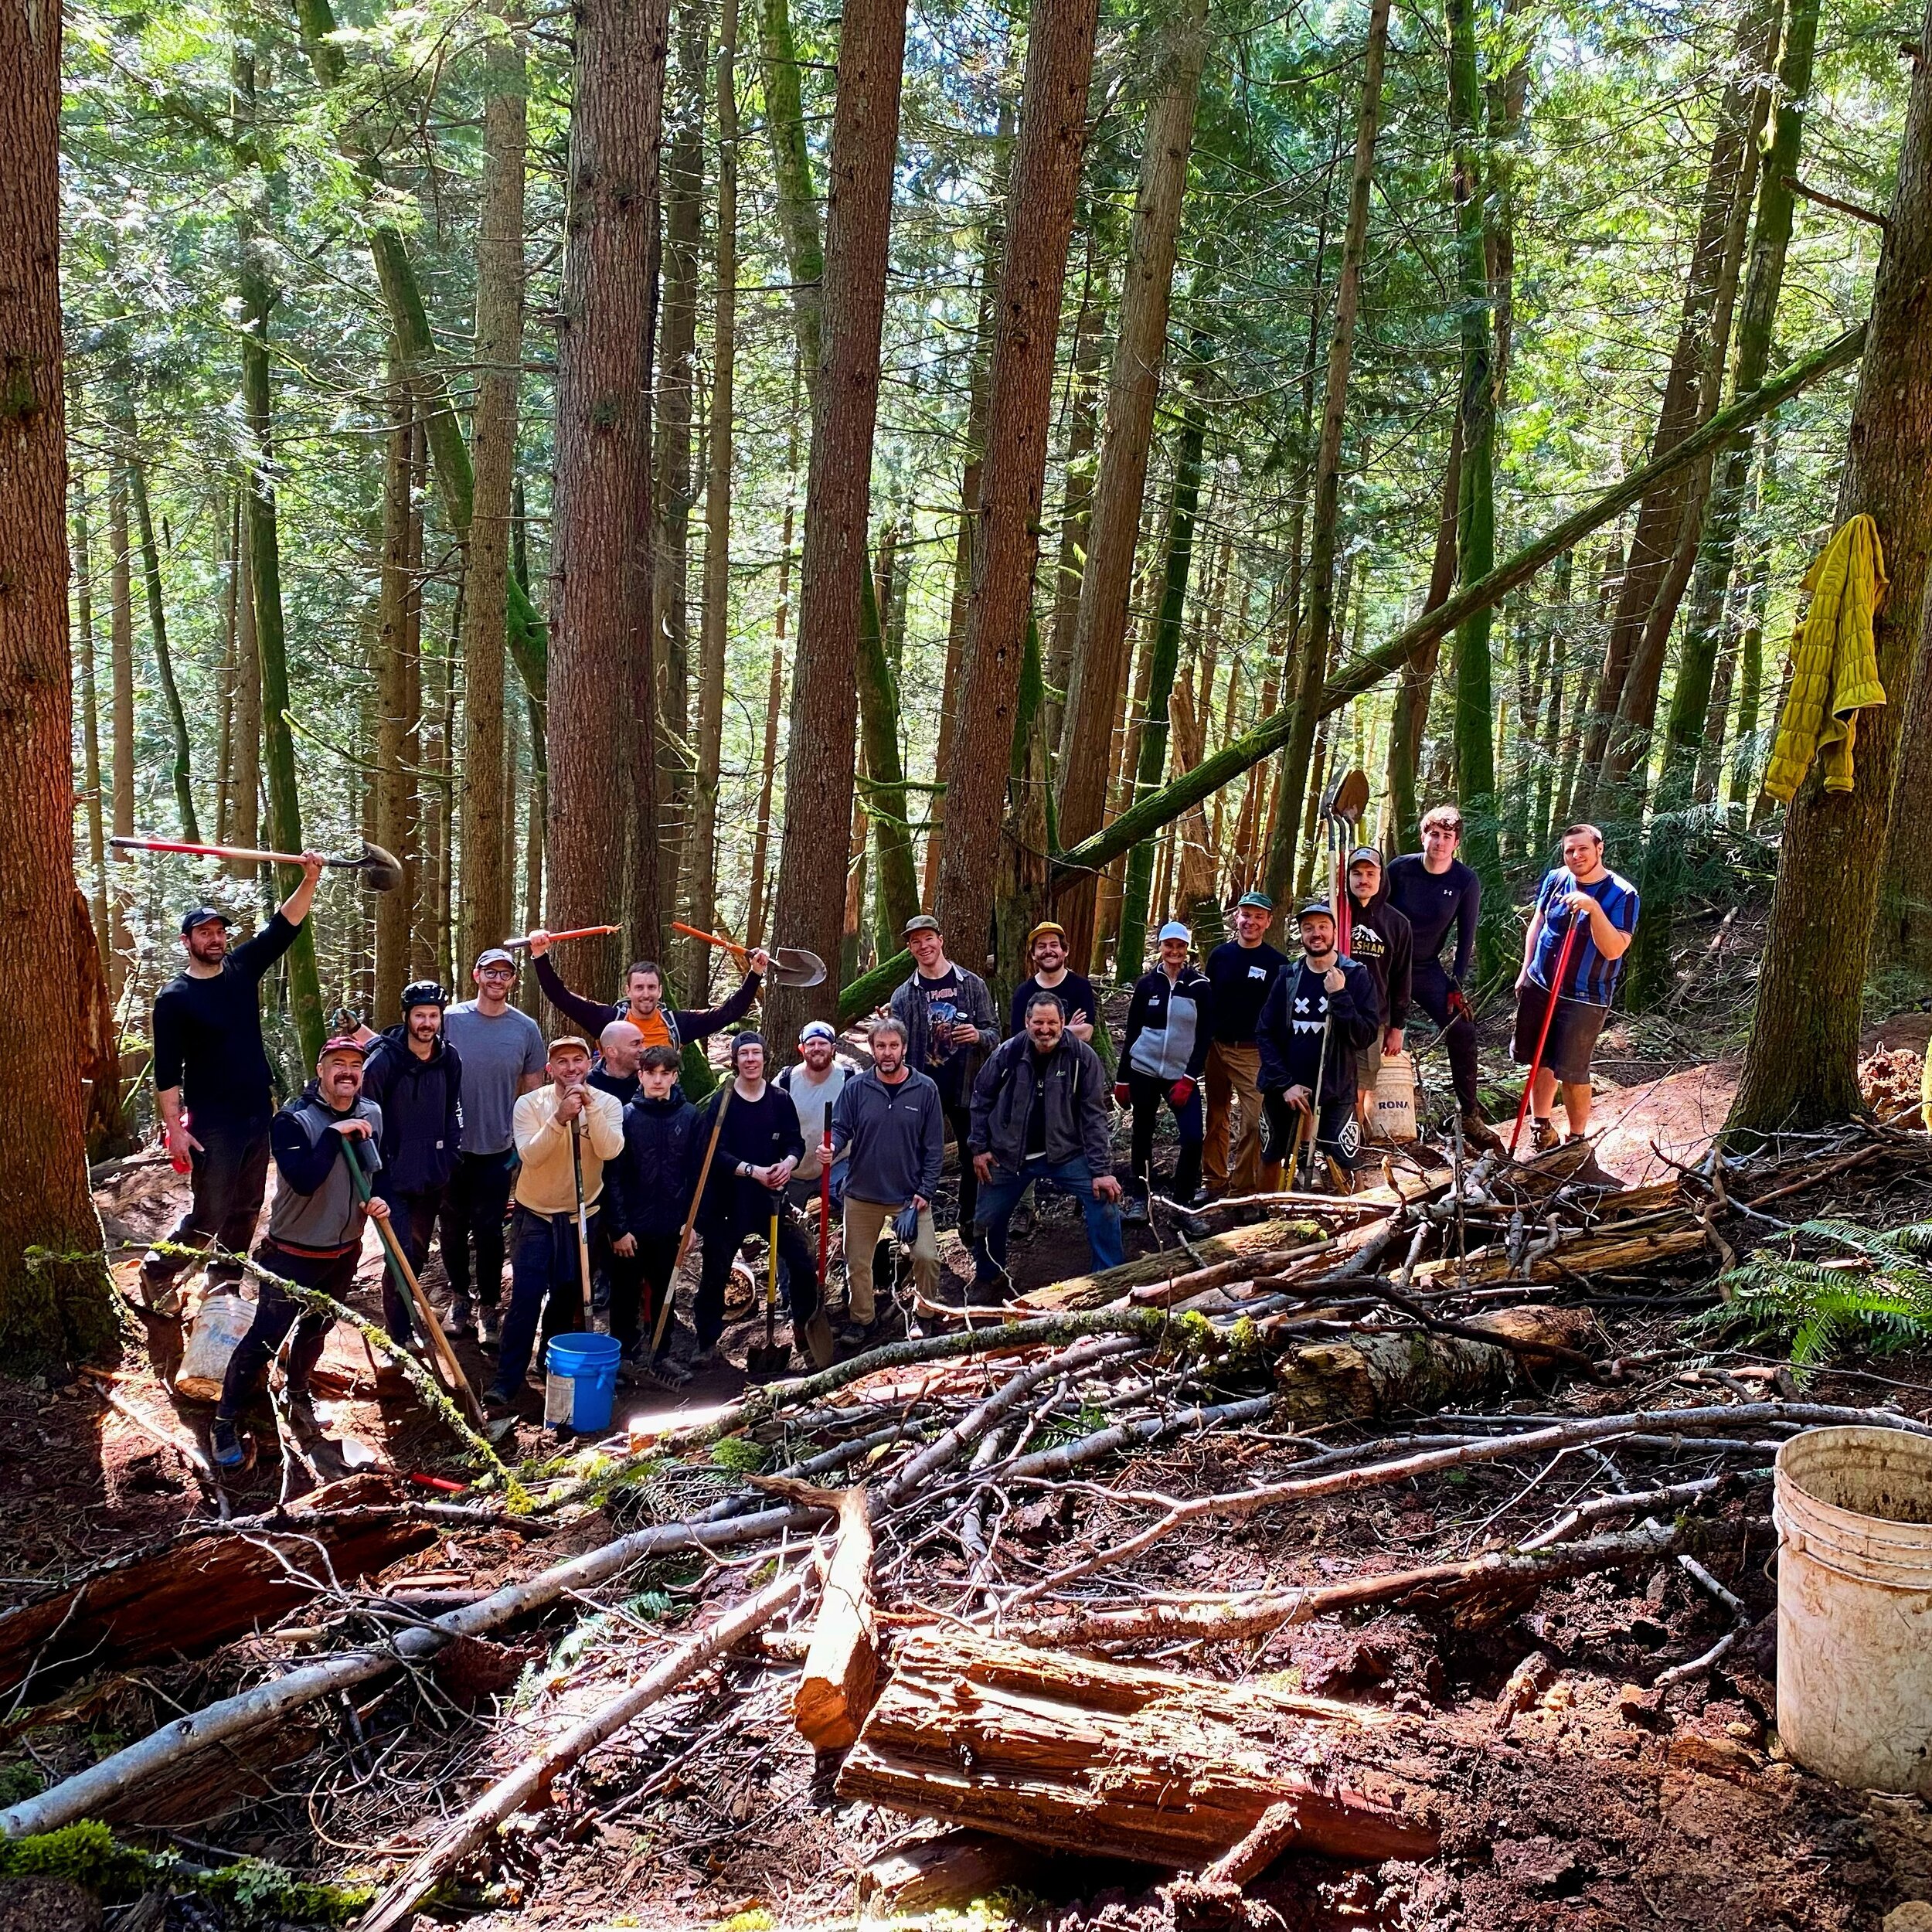 Awesome trail day out on Cypress this weekend. Stoked to have such an awesome community out building 🤟
.
.
.
.
#trailbuilding #community #mtb #mountainbiking #thankyou #peopleareawesome